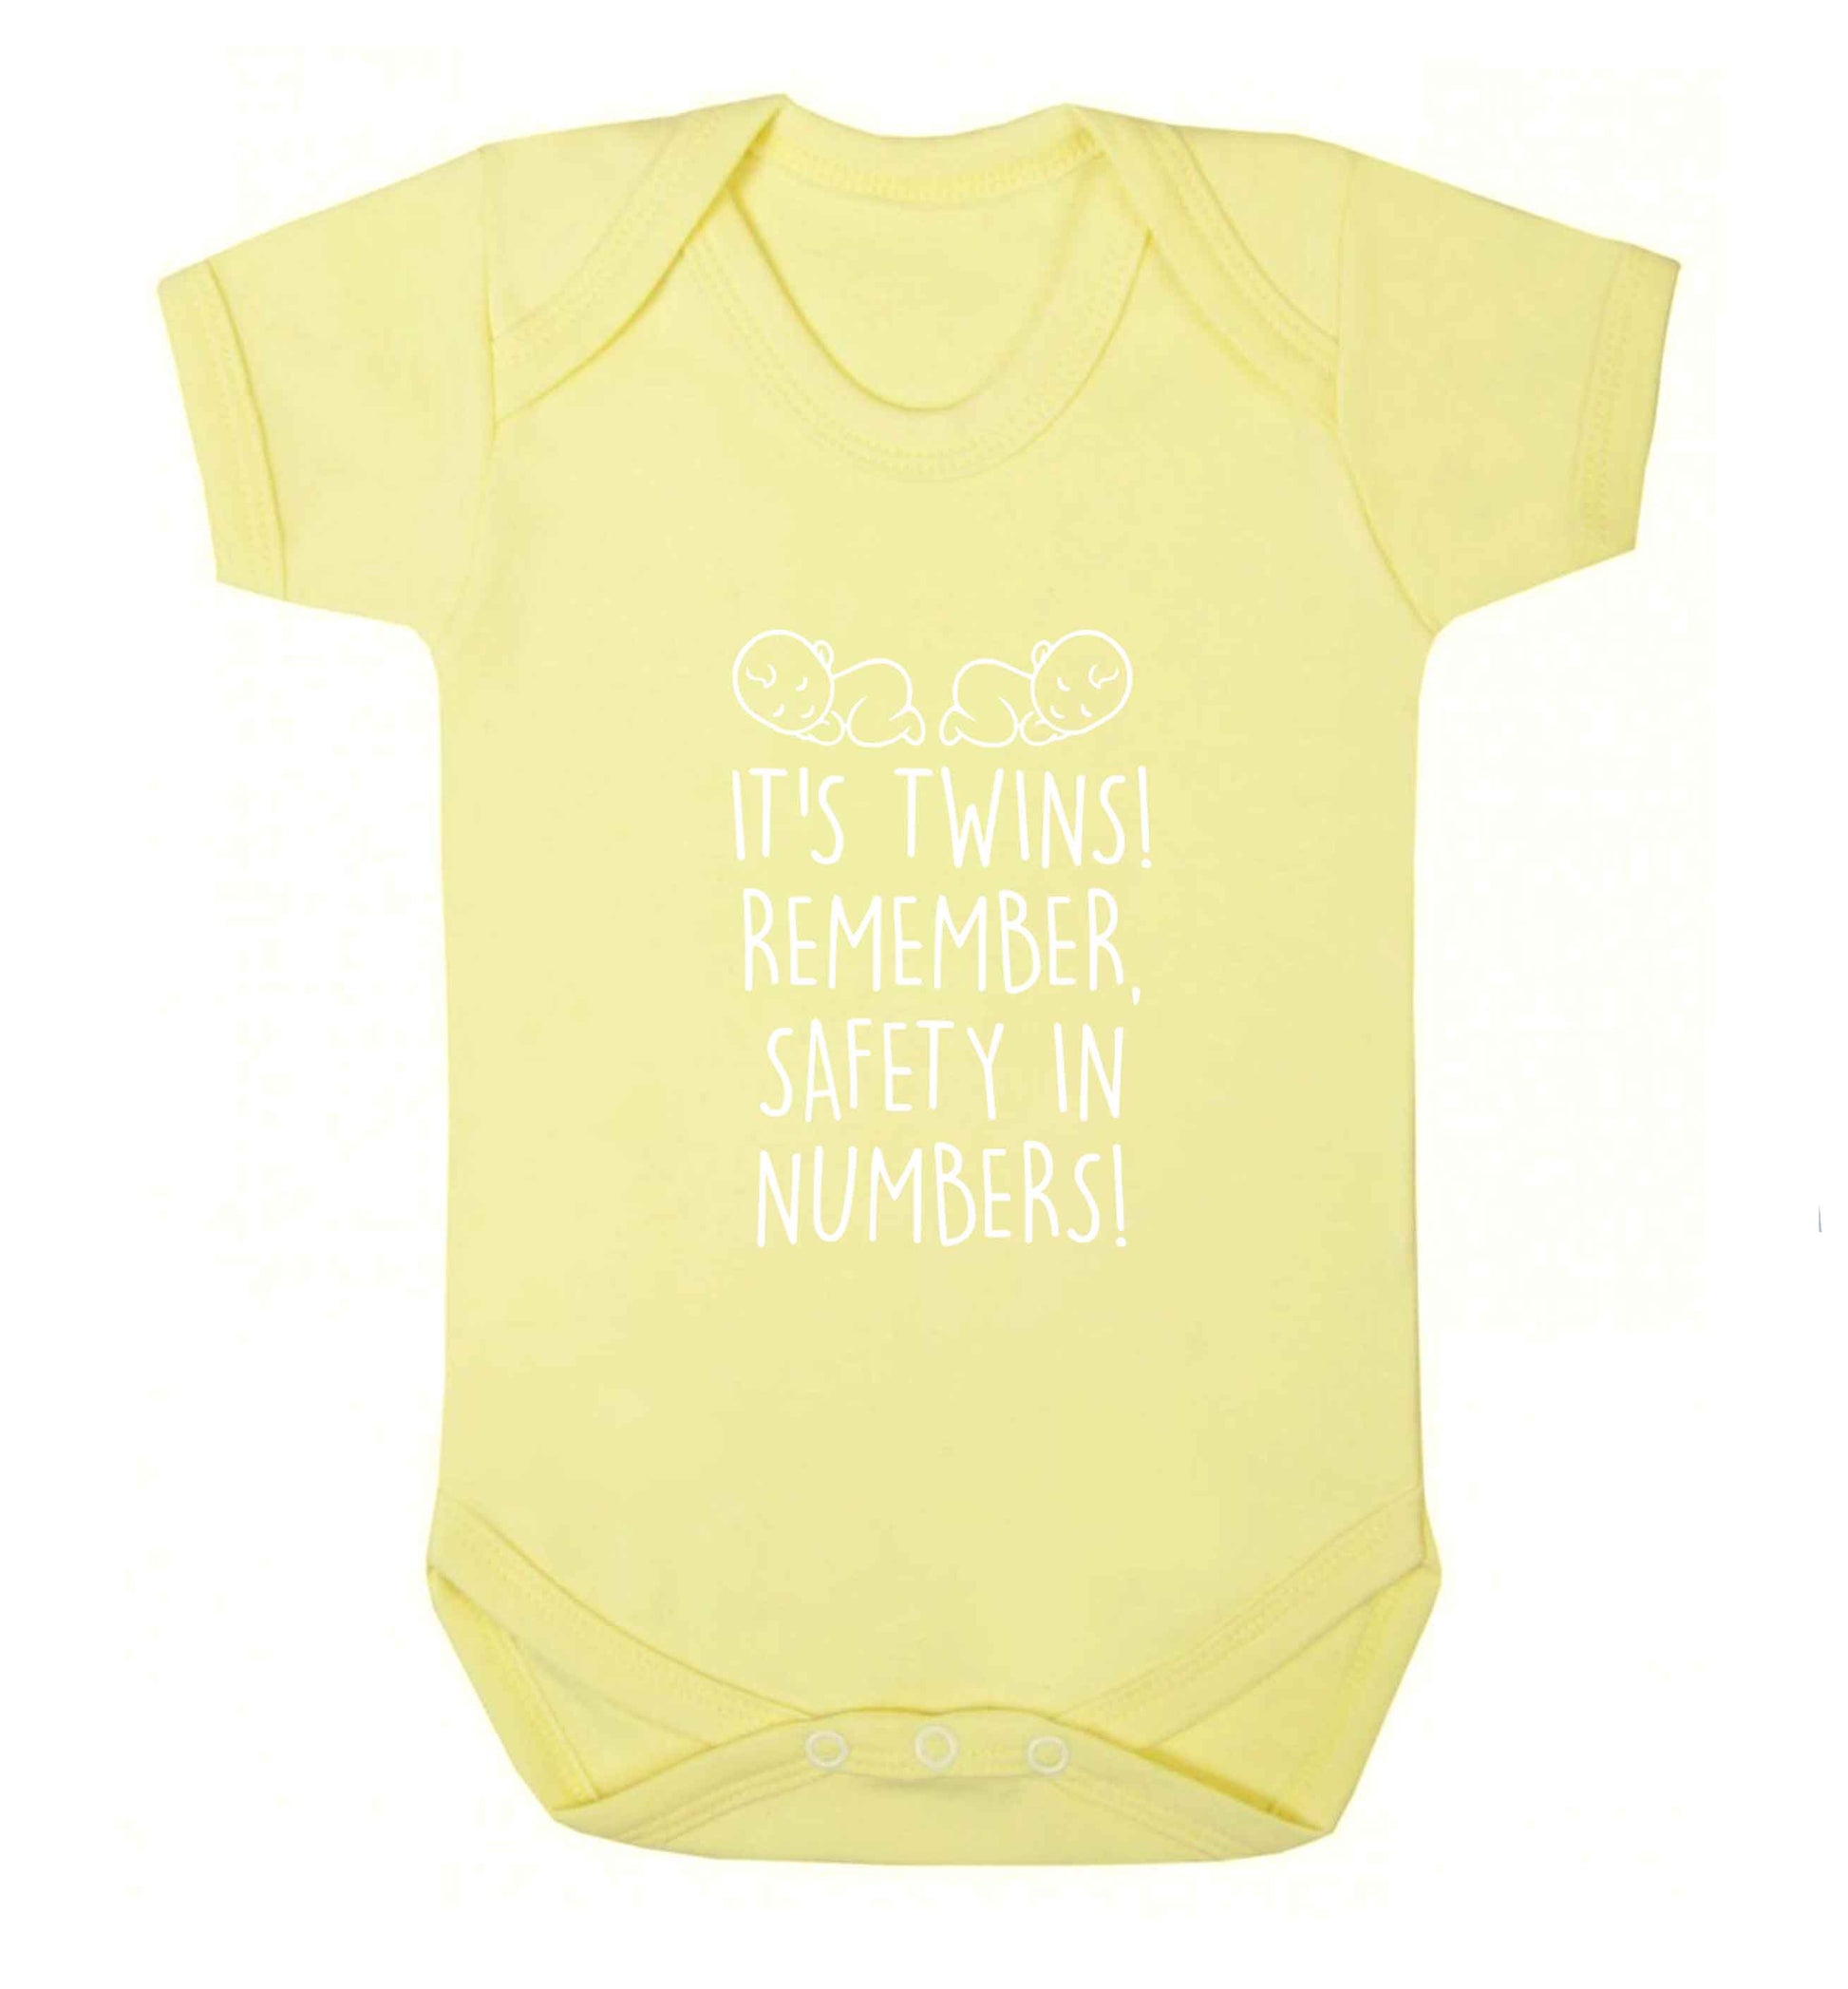 It's twins! Remember safety in numbers! baby vest pale yellow 18-24 months